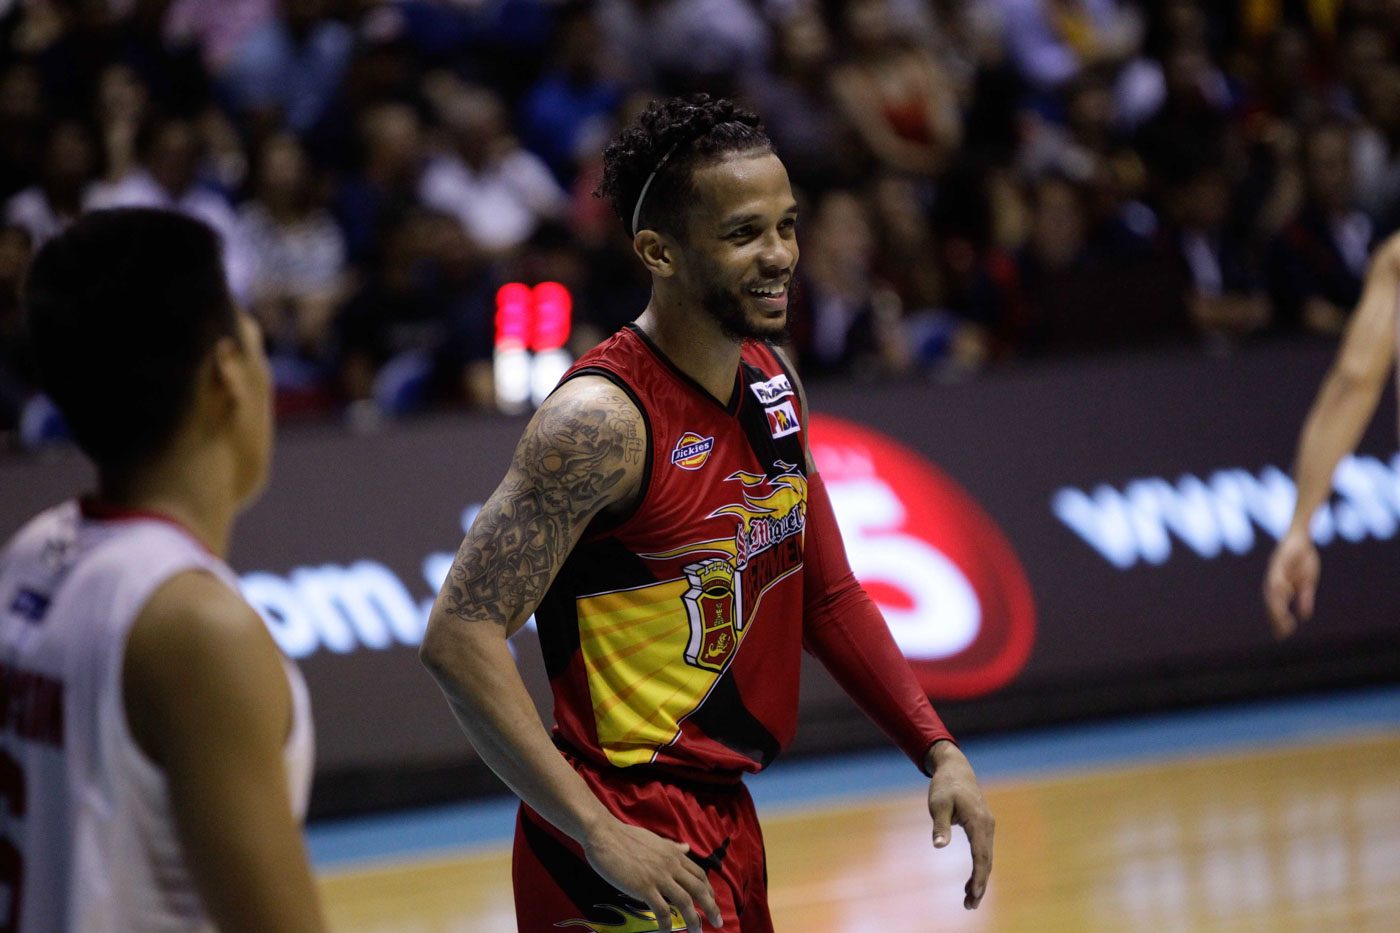 SMB edges Ginebra in Game 3 for 2-1 finals lead